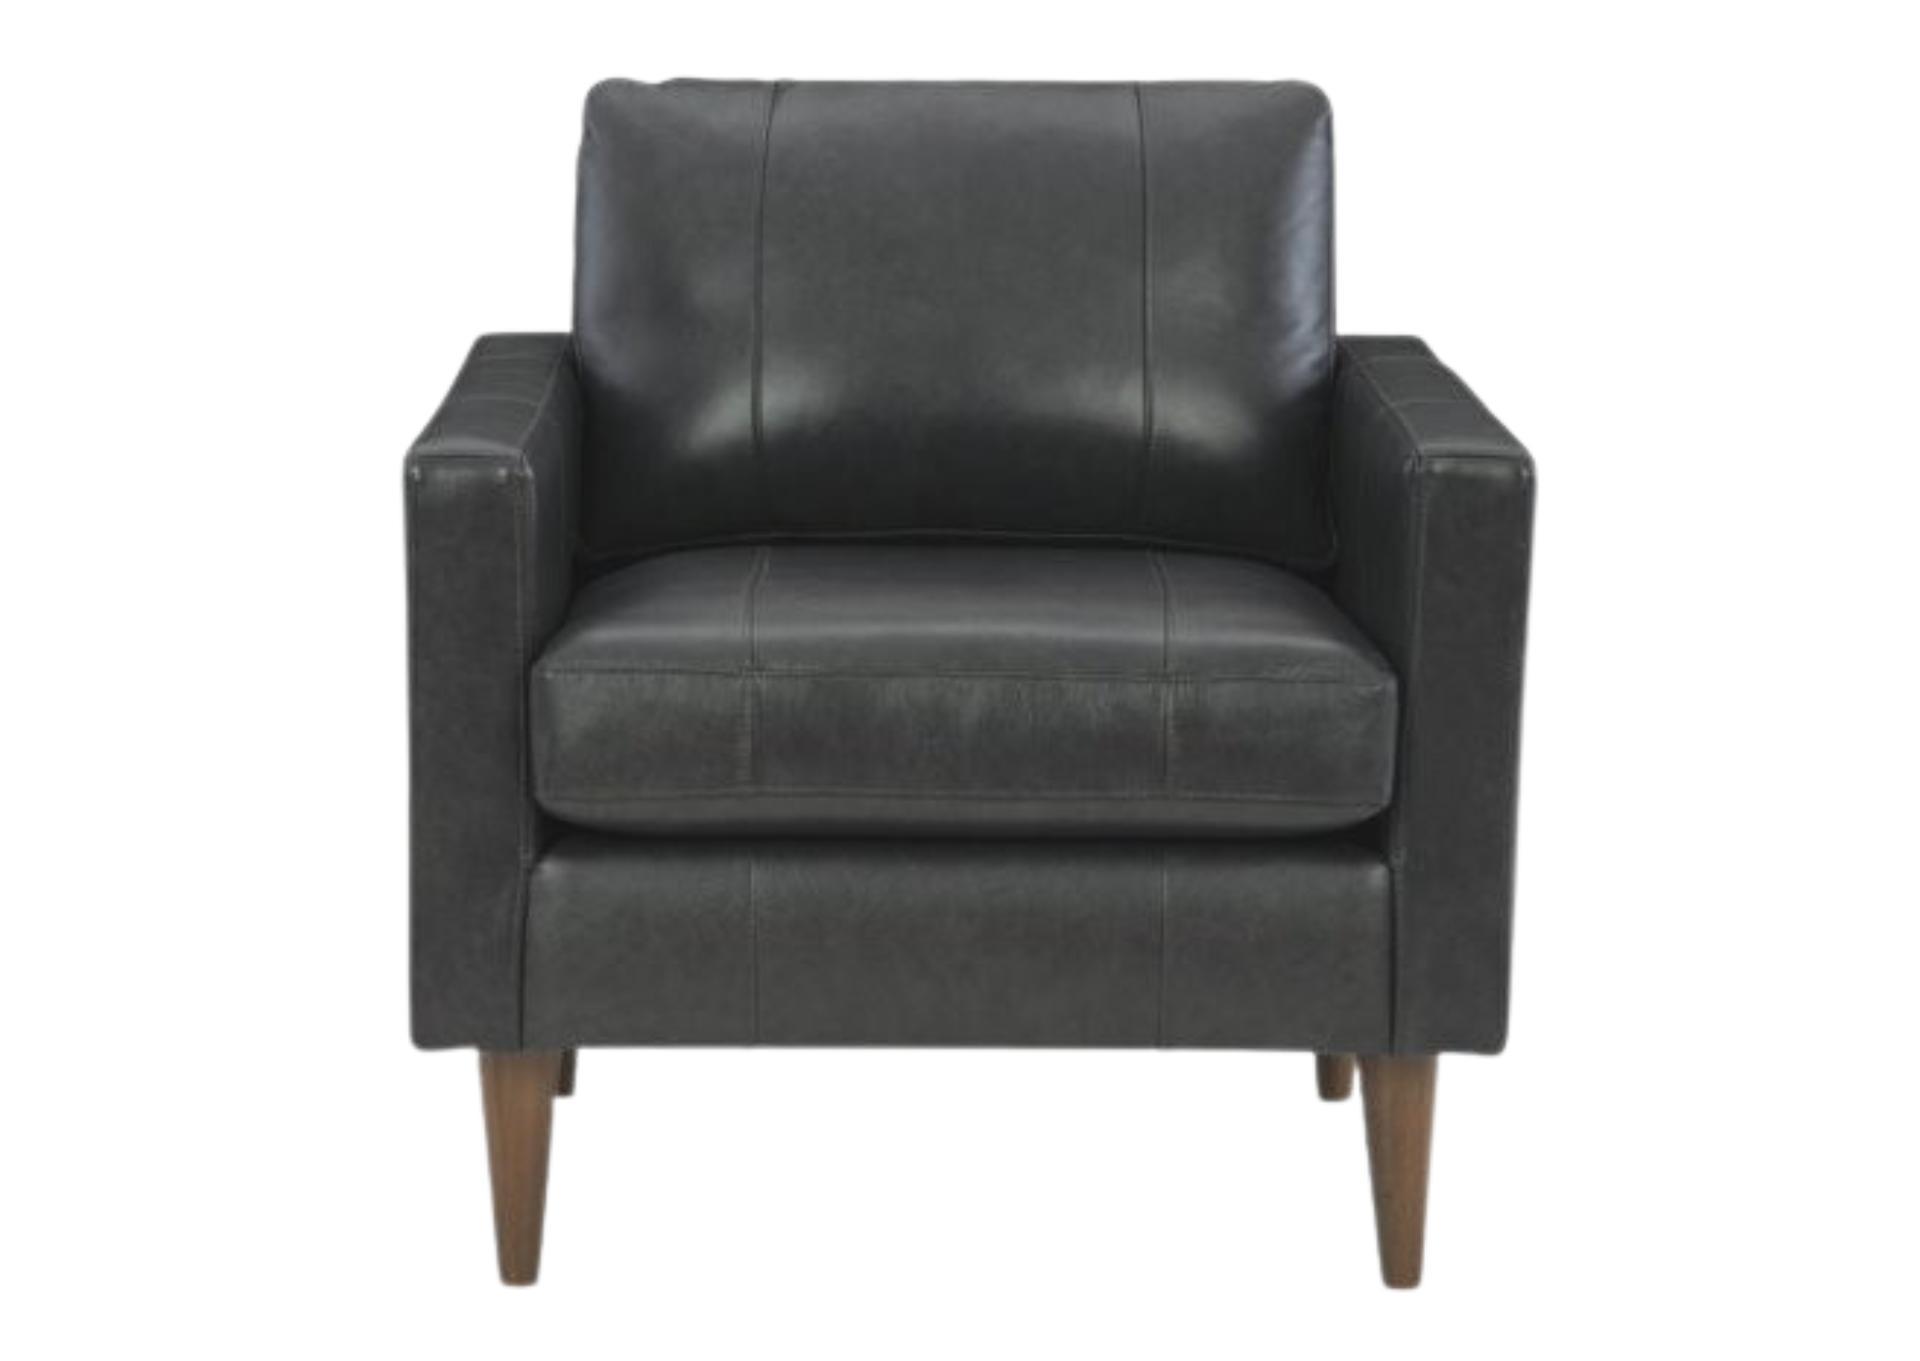 TRAFTON CHARCOAL LEATHER CHAIR